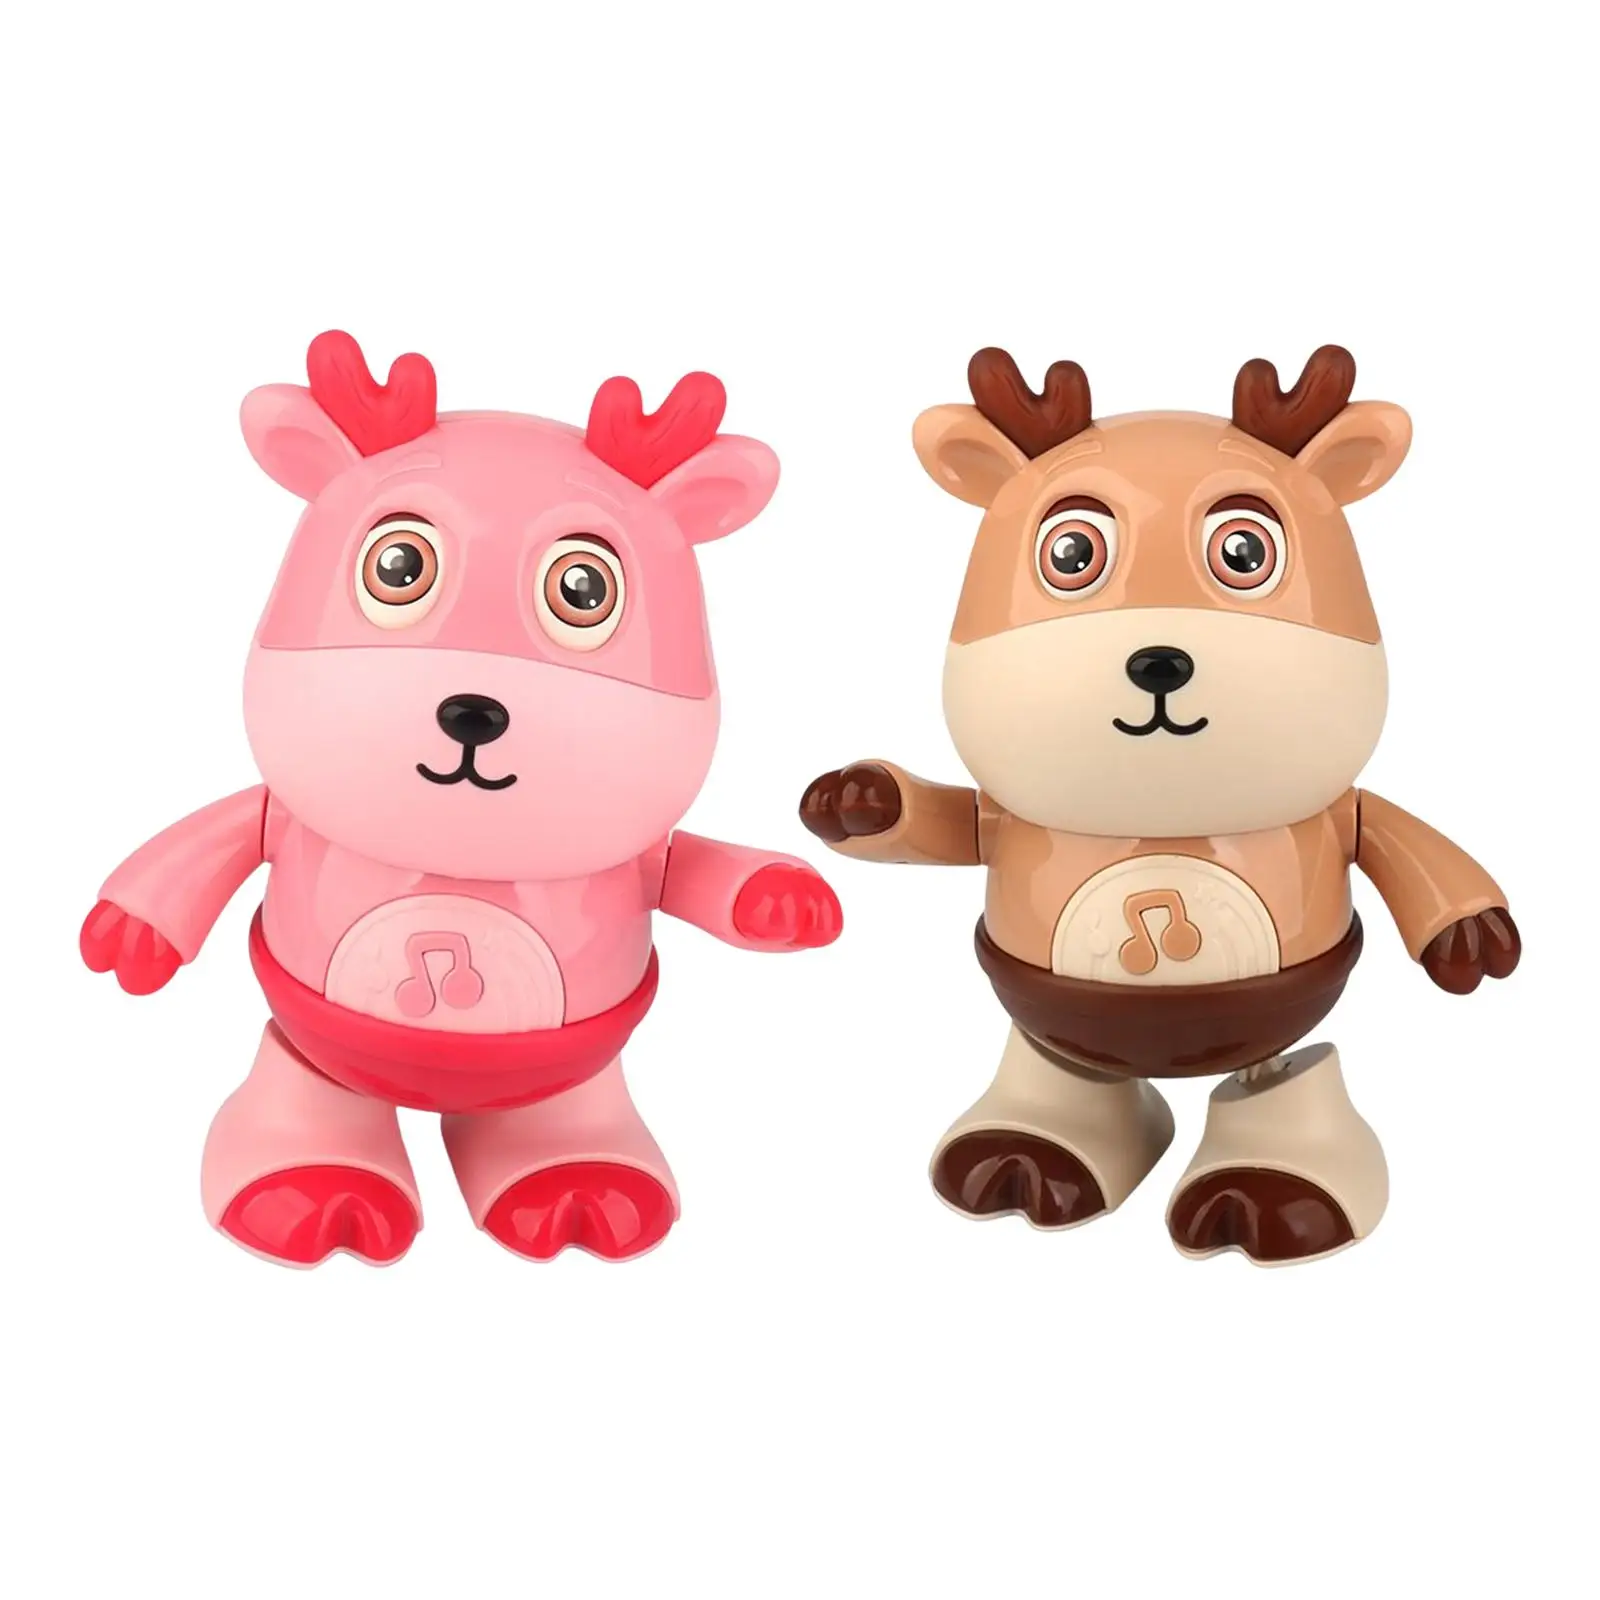 Dancing Deer Toy Deer Musical Toy Dance Animal Doll with Music and Light Learning Toy Dancing Swing Deer Toy for Decoration Gift